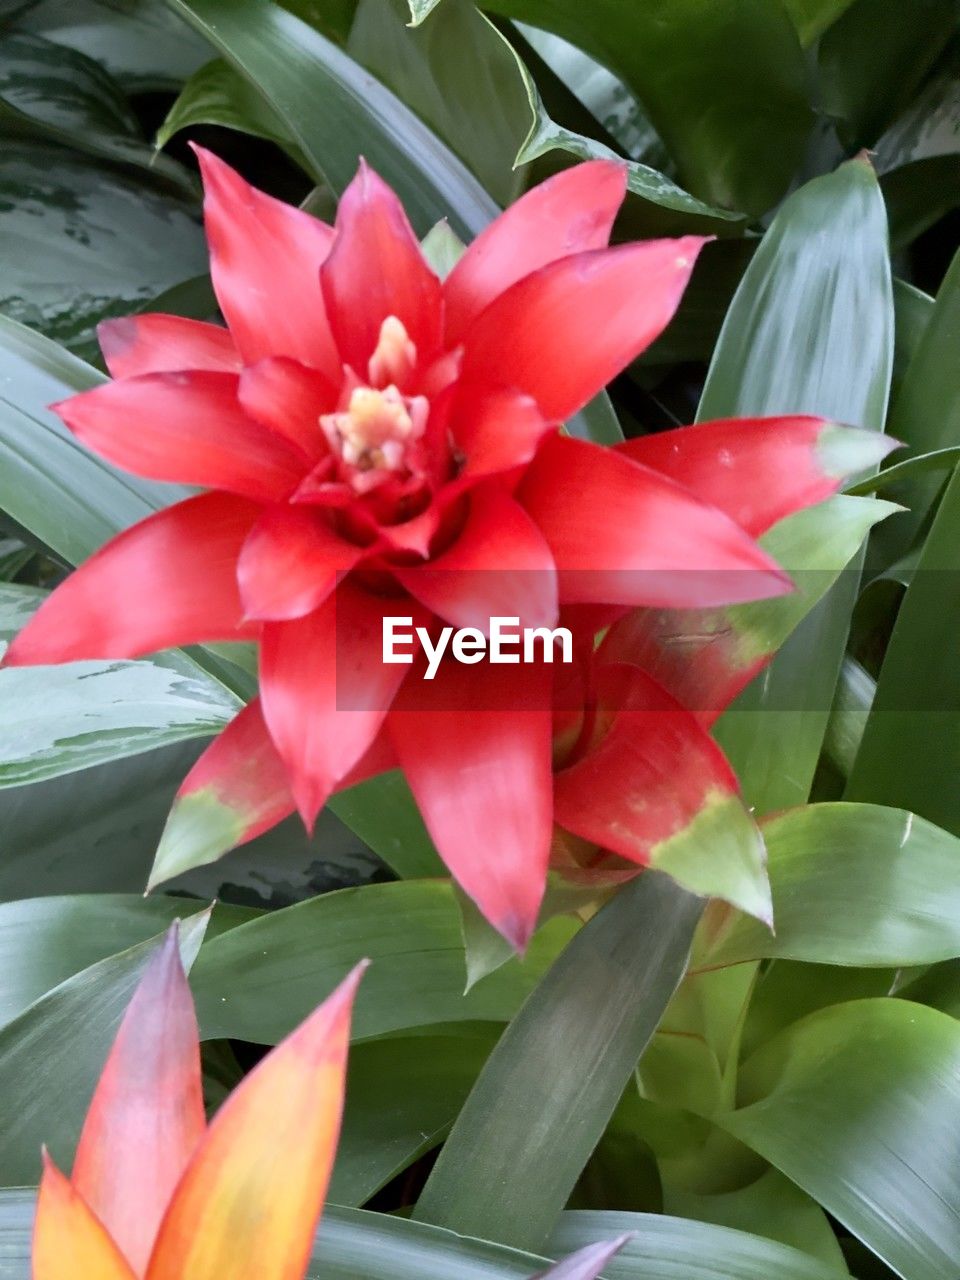 flower, plant, flowering plant, leaf, plant part, beauty in nature, petal, freshness, close-up, nature, growth, pink, flower head, inflorescence, no people, fragility, green, red, outdoors, botany, lily